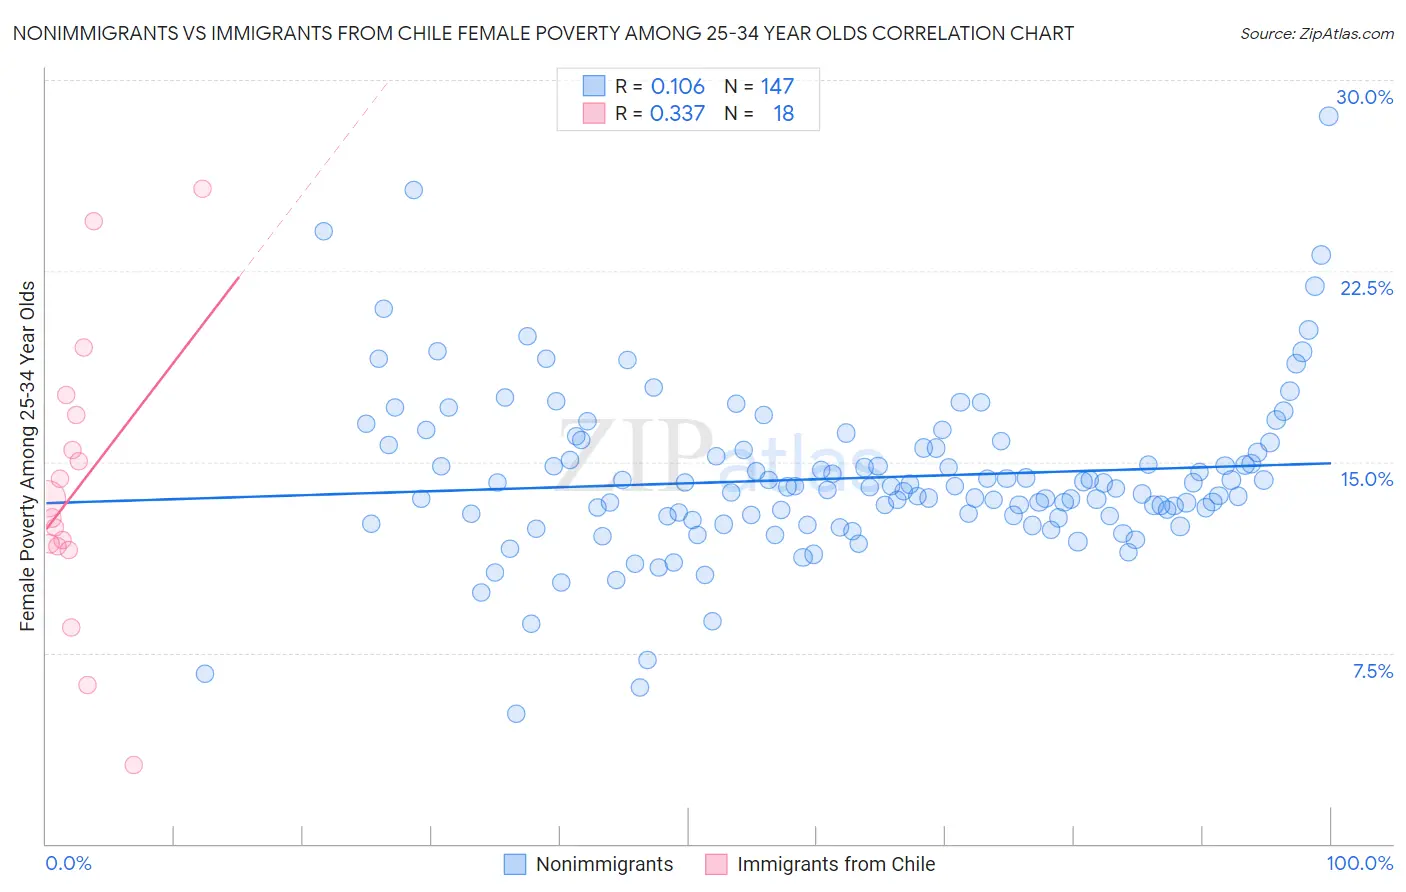 Nonimmigrants vs Immigrants from Chile Female Poverty Among 25-34 Year Olds